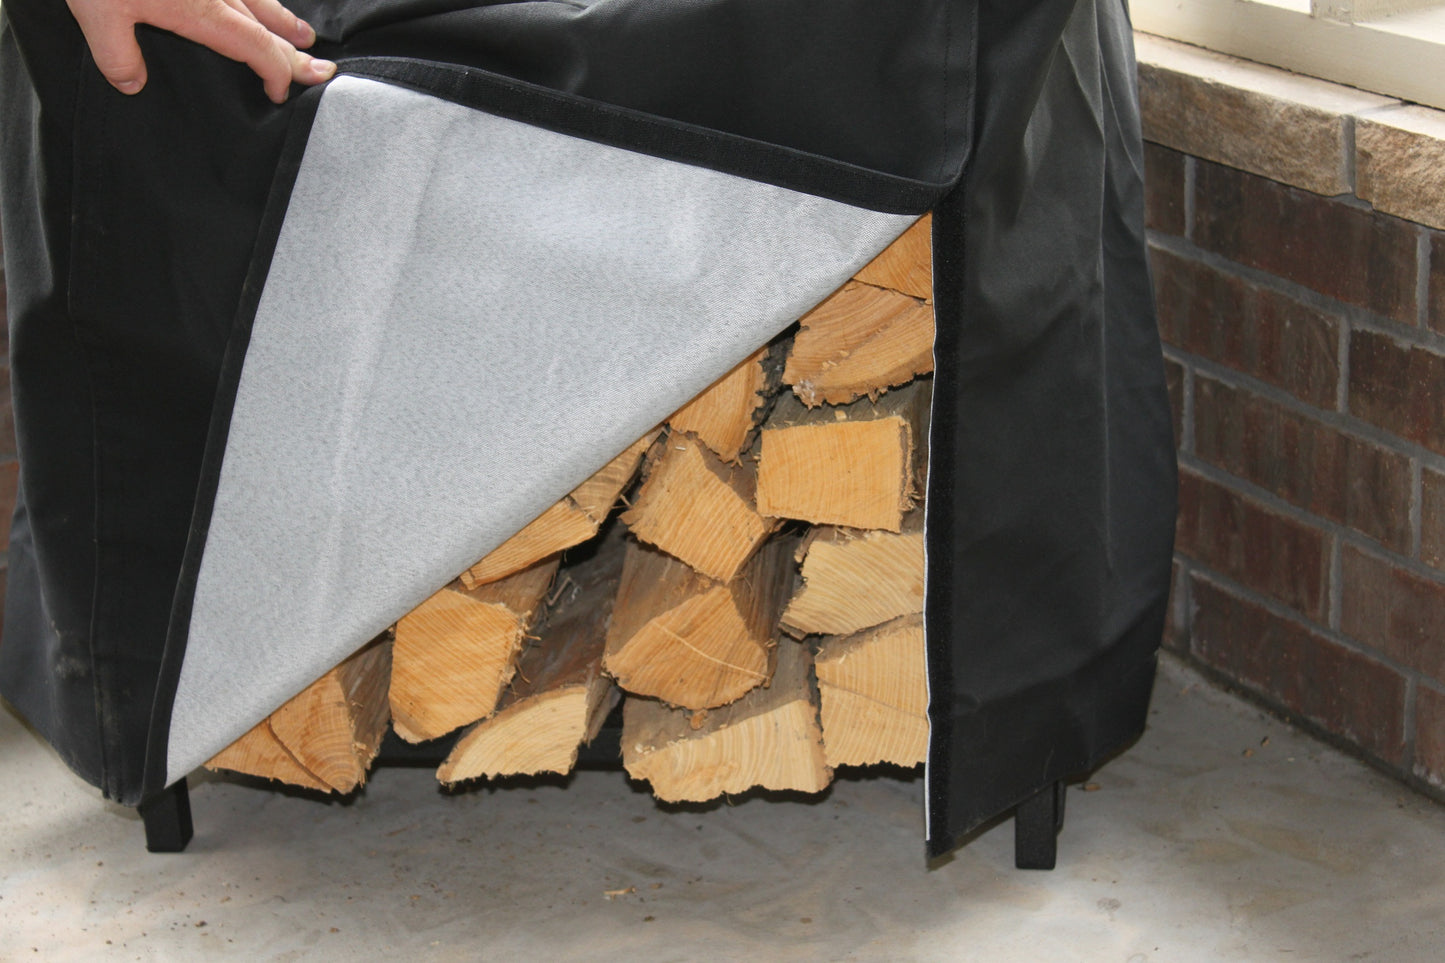 The Woodhaven 2ft Firewood Rack